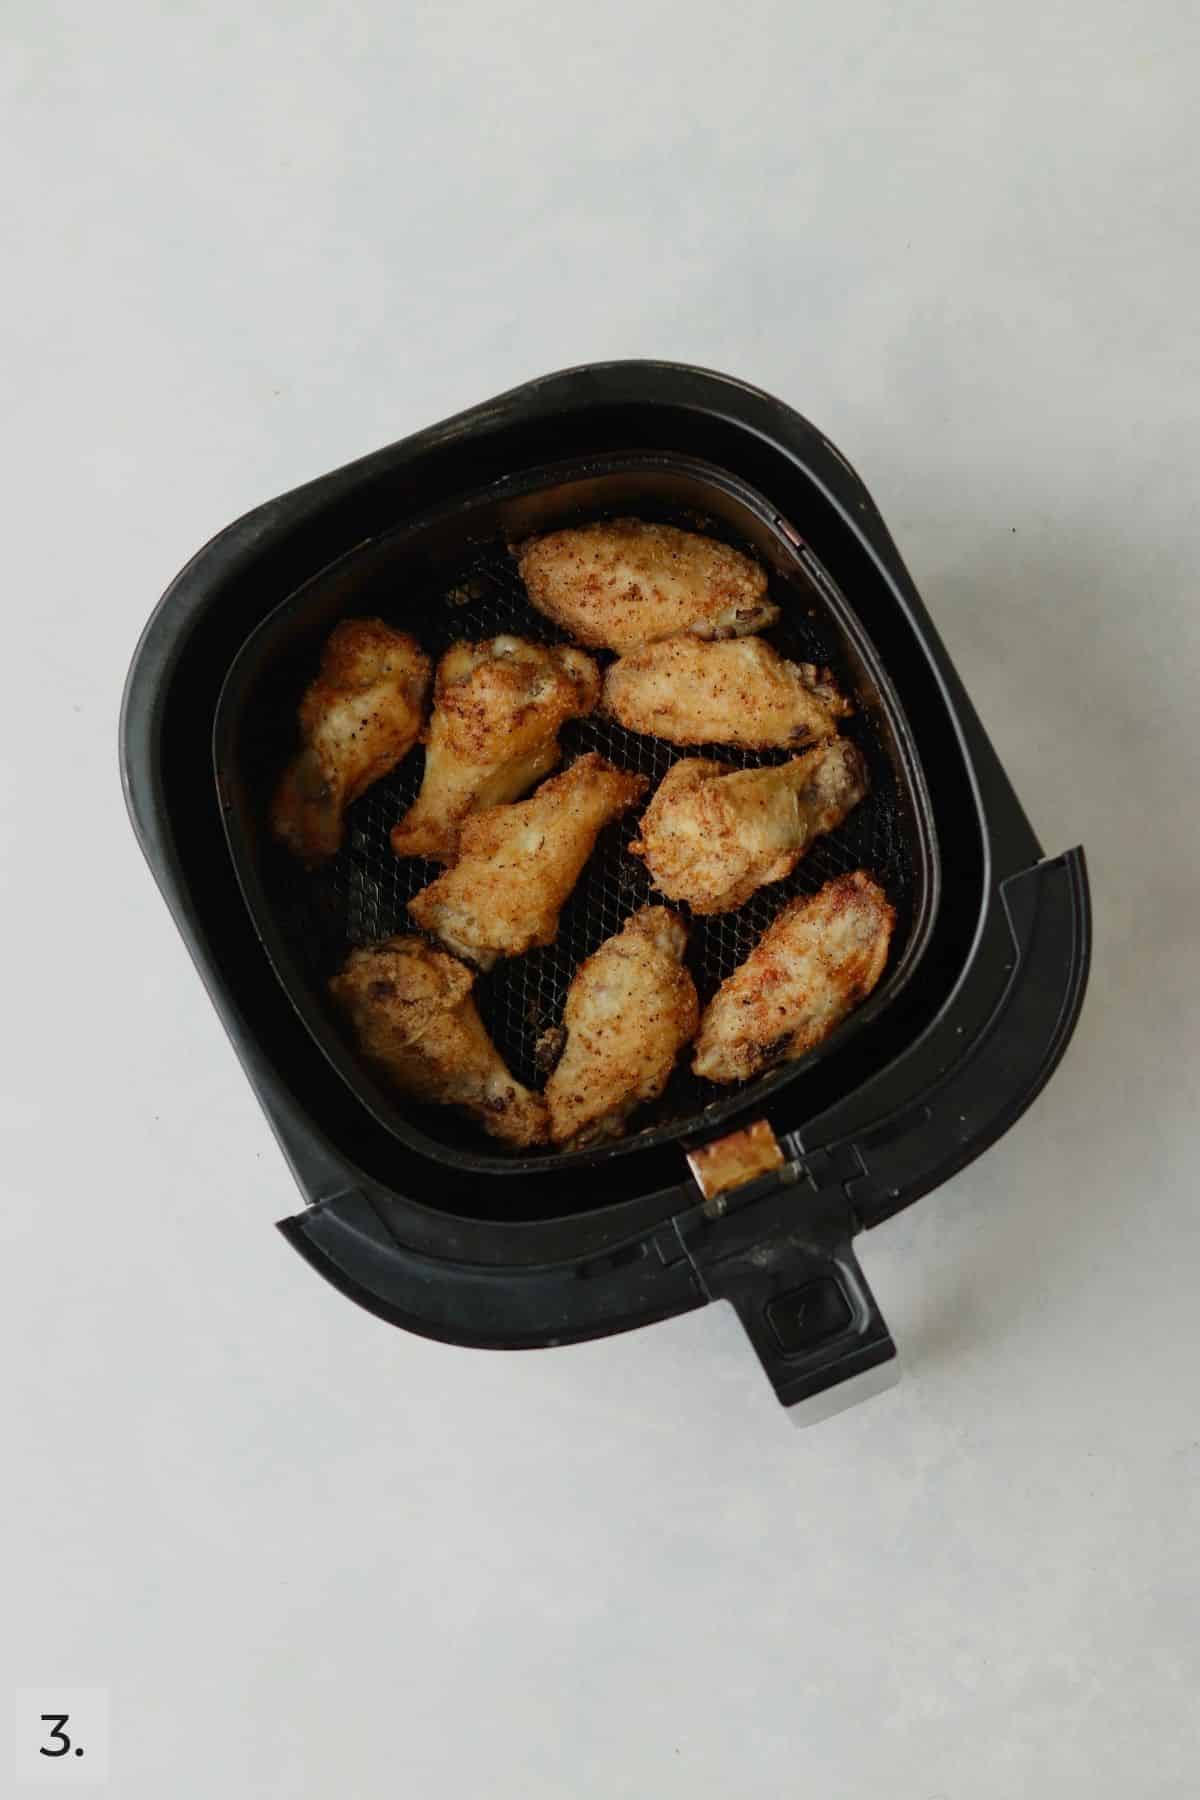 Cooked chicken wings in air fryer.